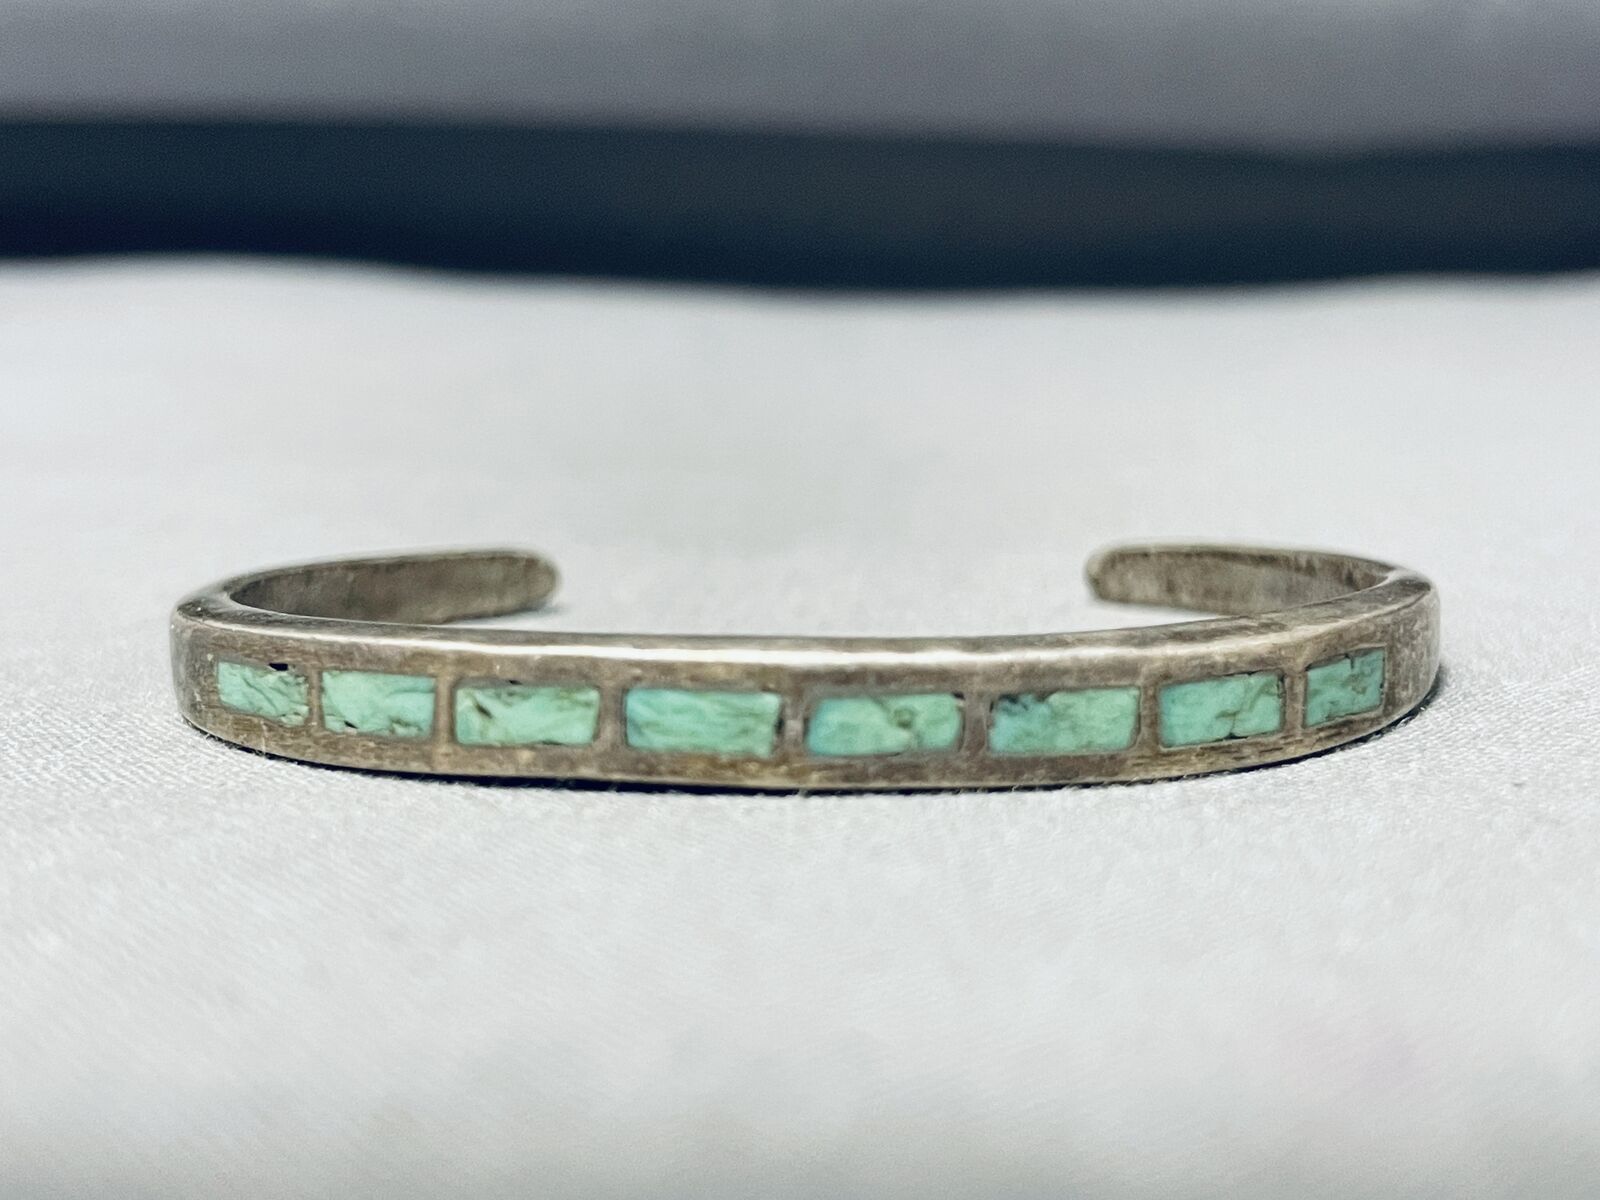 OUTSTANDING VINTAGE NAVAJO 8 INLAY TURQUOISE SQUARES STERLING SILVER CUFF